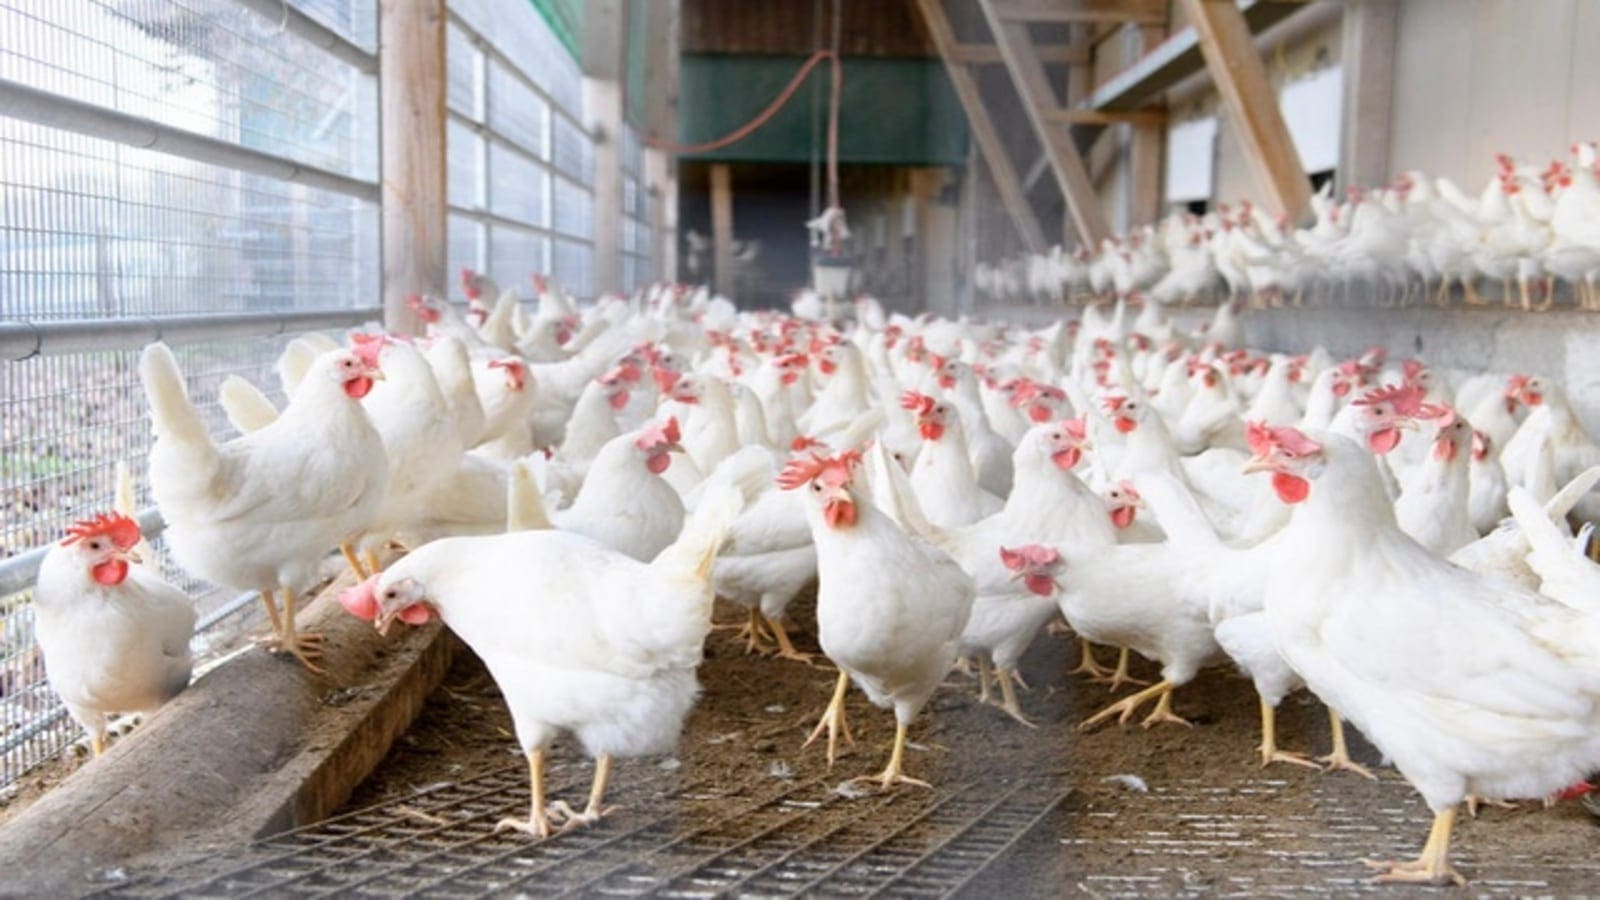 South Africa confirms avian flu outbreak, cases reported in commercial poultry farm